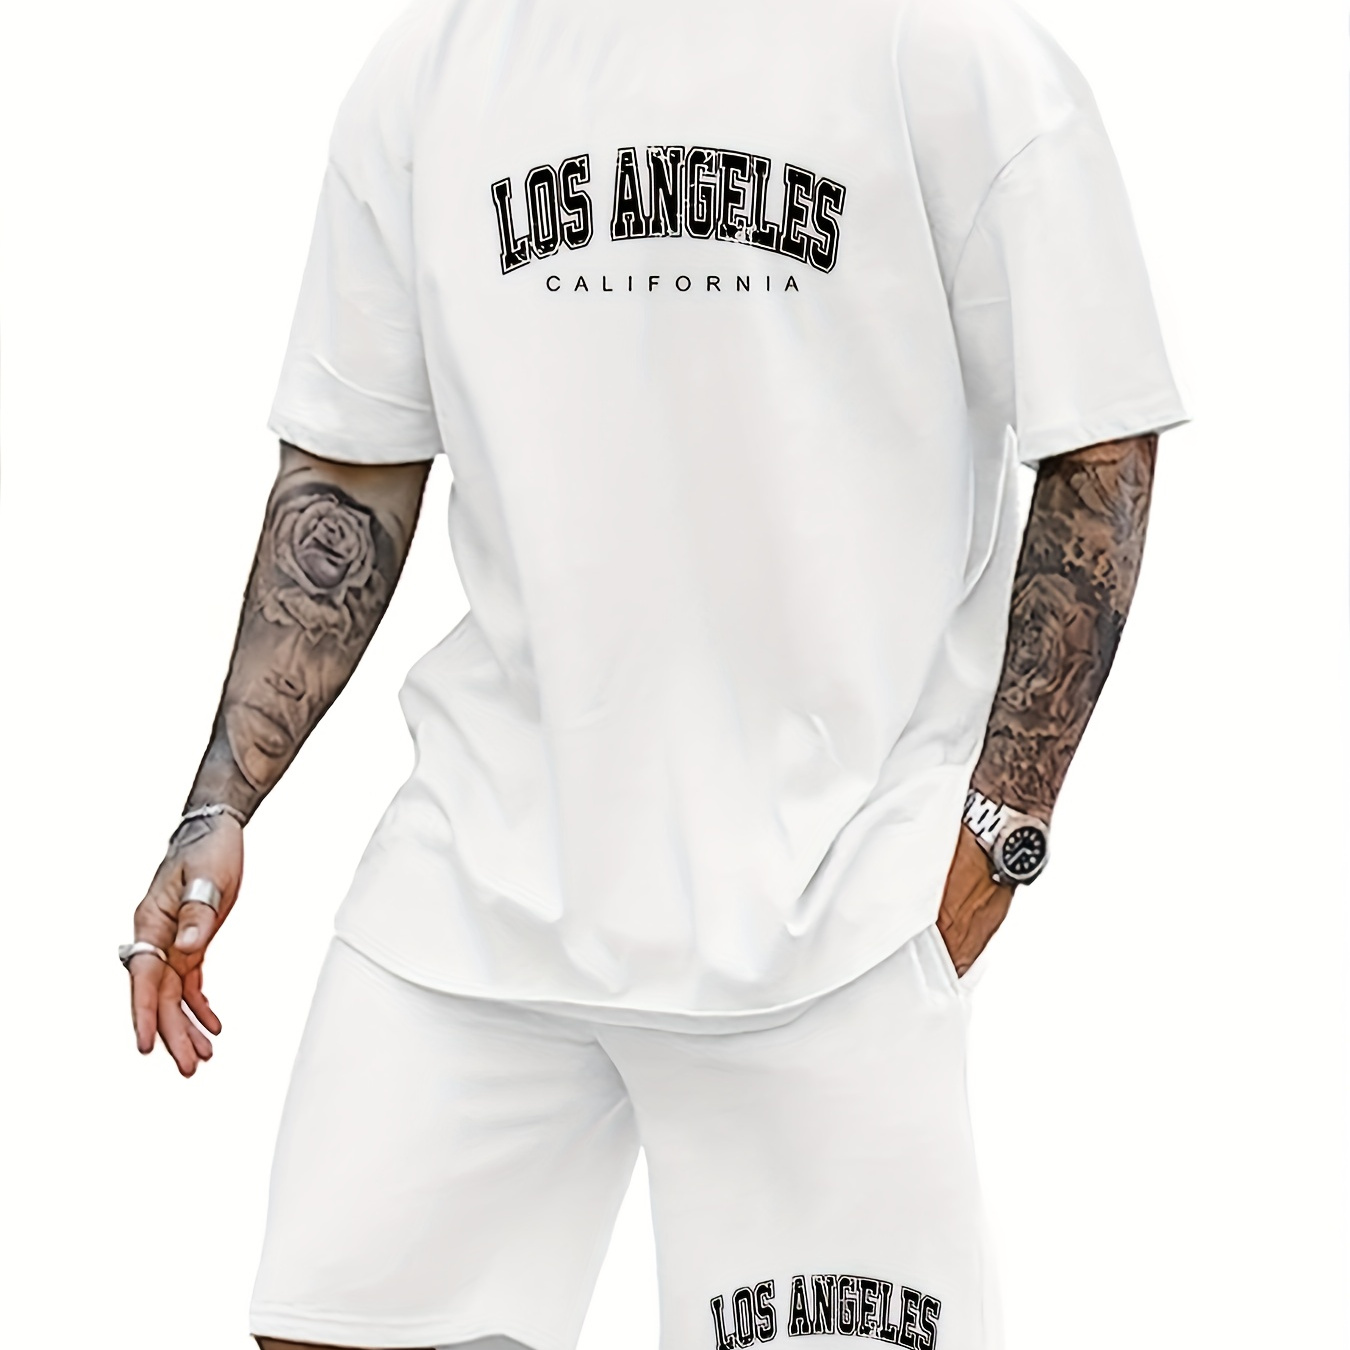 

Men's Trendy Casual Comfy Tees & Shorts, Letter Los Angeles California Graphic Print, Crew Neck Short Sleeve T-shirt & Loose Shorts With Drawstrings Pockets Home Pajamas Sets, Outdoor Sets For Summer